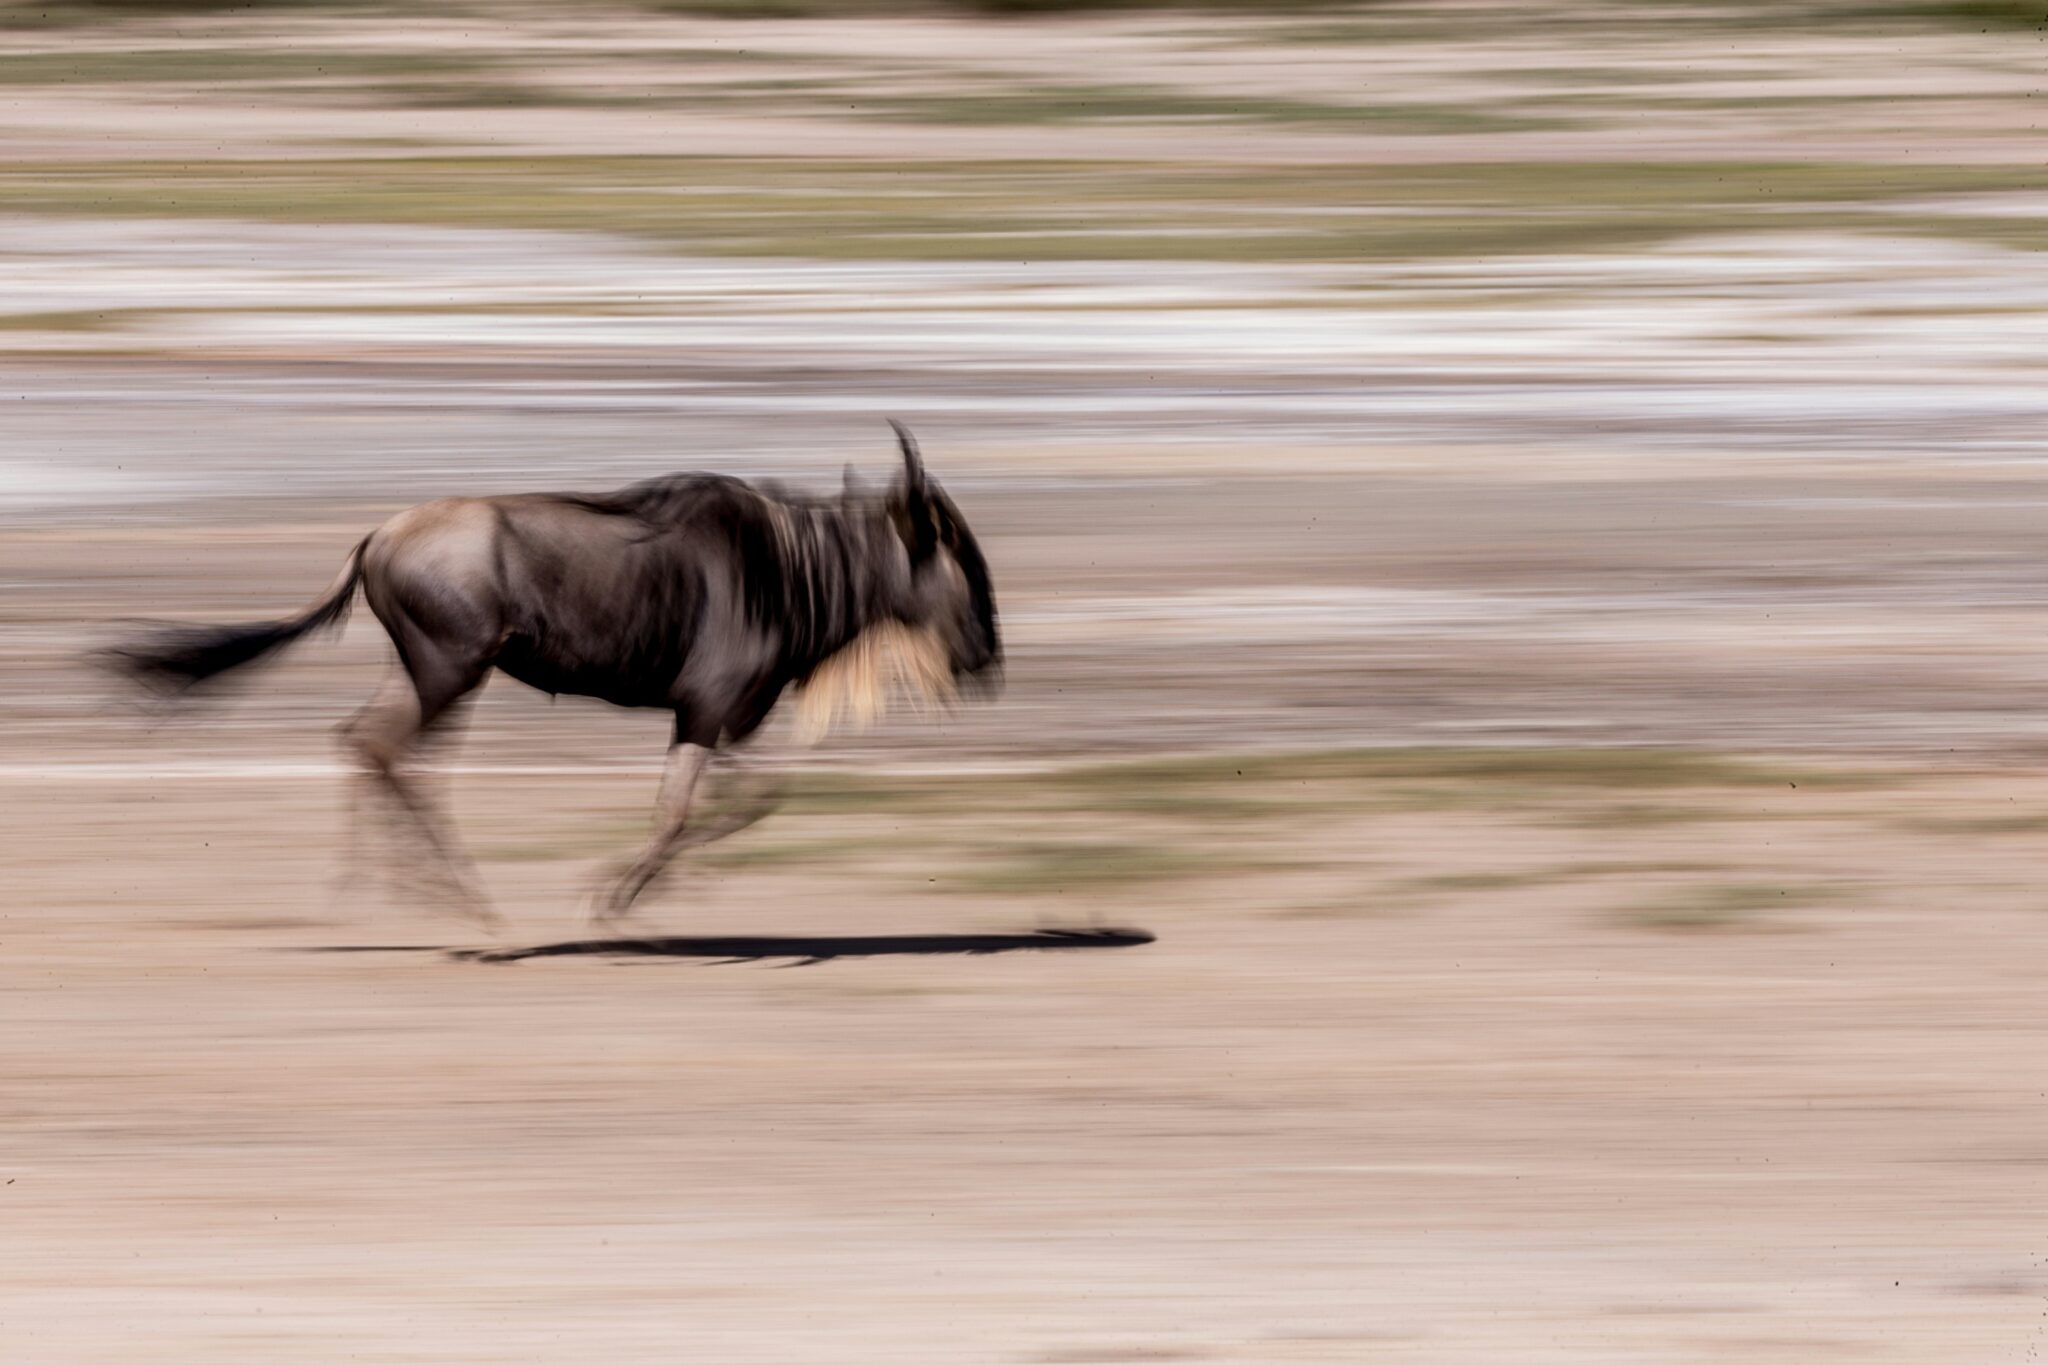 Picture of an animal running at full speed